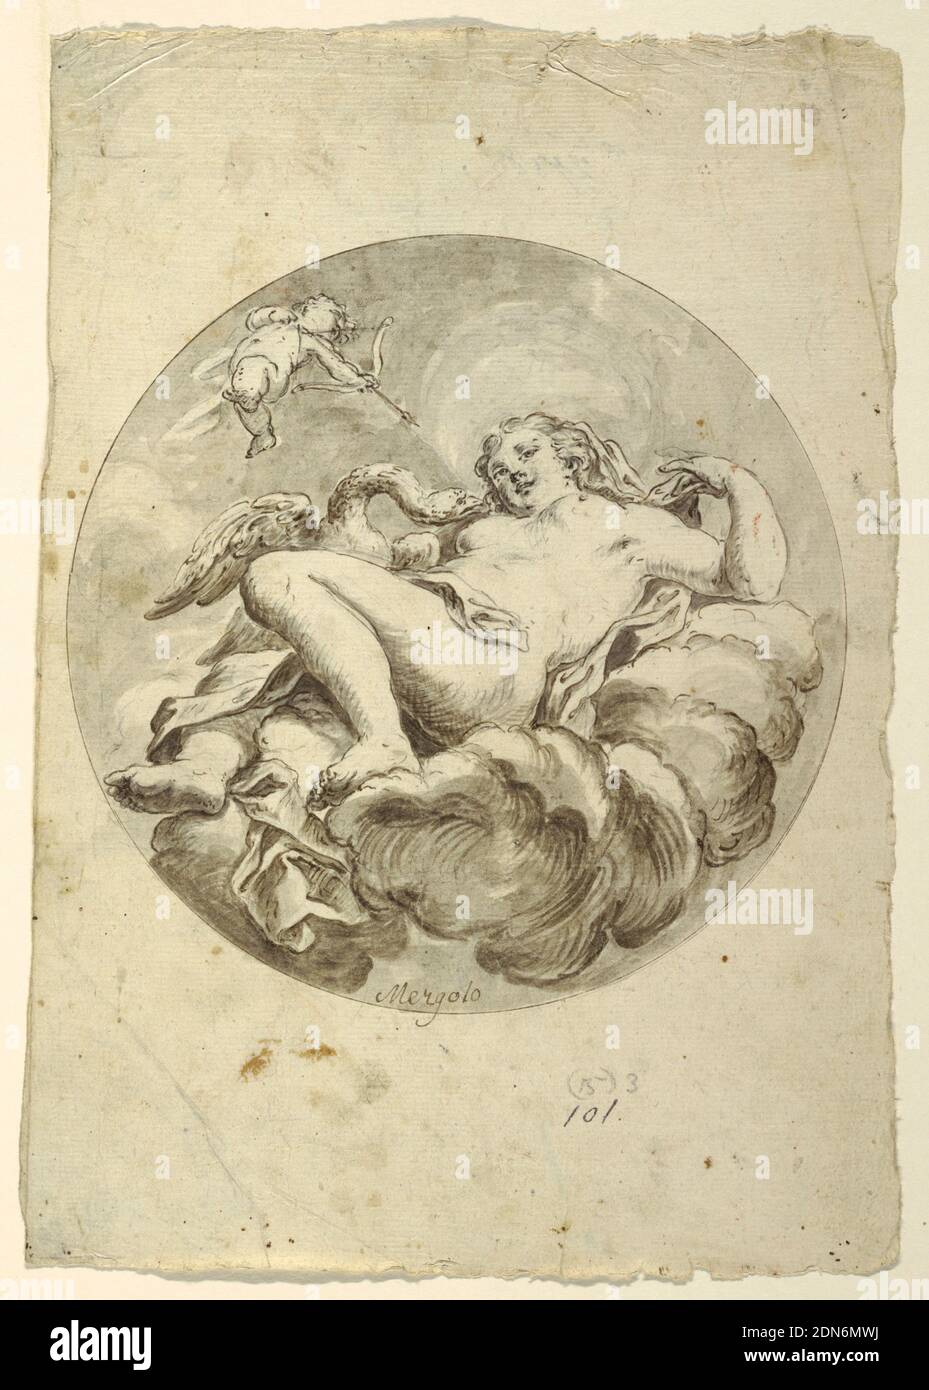 Project for a Ceiling Fresco: Leda and the Swan, Francesco Saverio Mergolo, Italian, 1746–1786, Brush and grey wash, pen and brown ink, graphite on paper, Circular borderline. Leda upon clouds, recumbent, the swan beside her. Amor is aiming at her., Southern Italy, ca. 1775, figures, Drawing Stock Photo